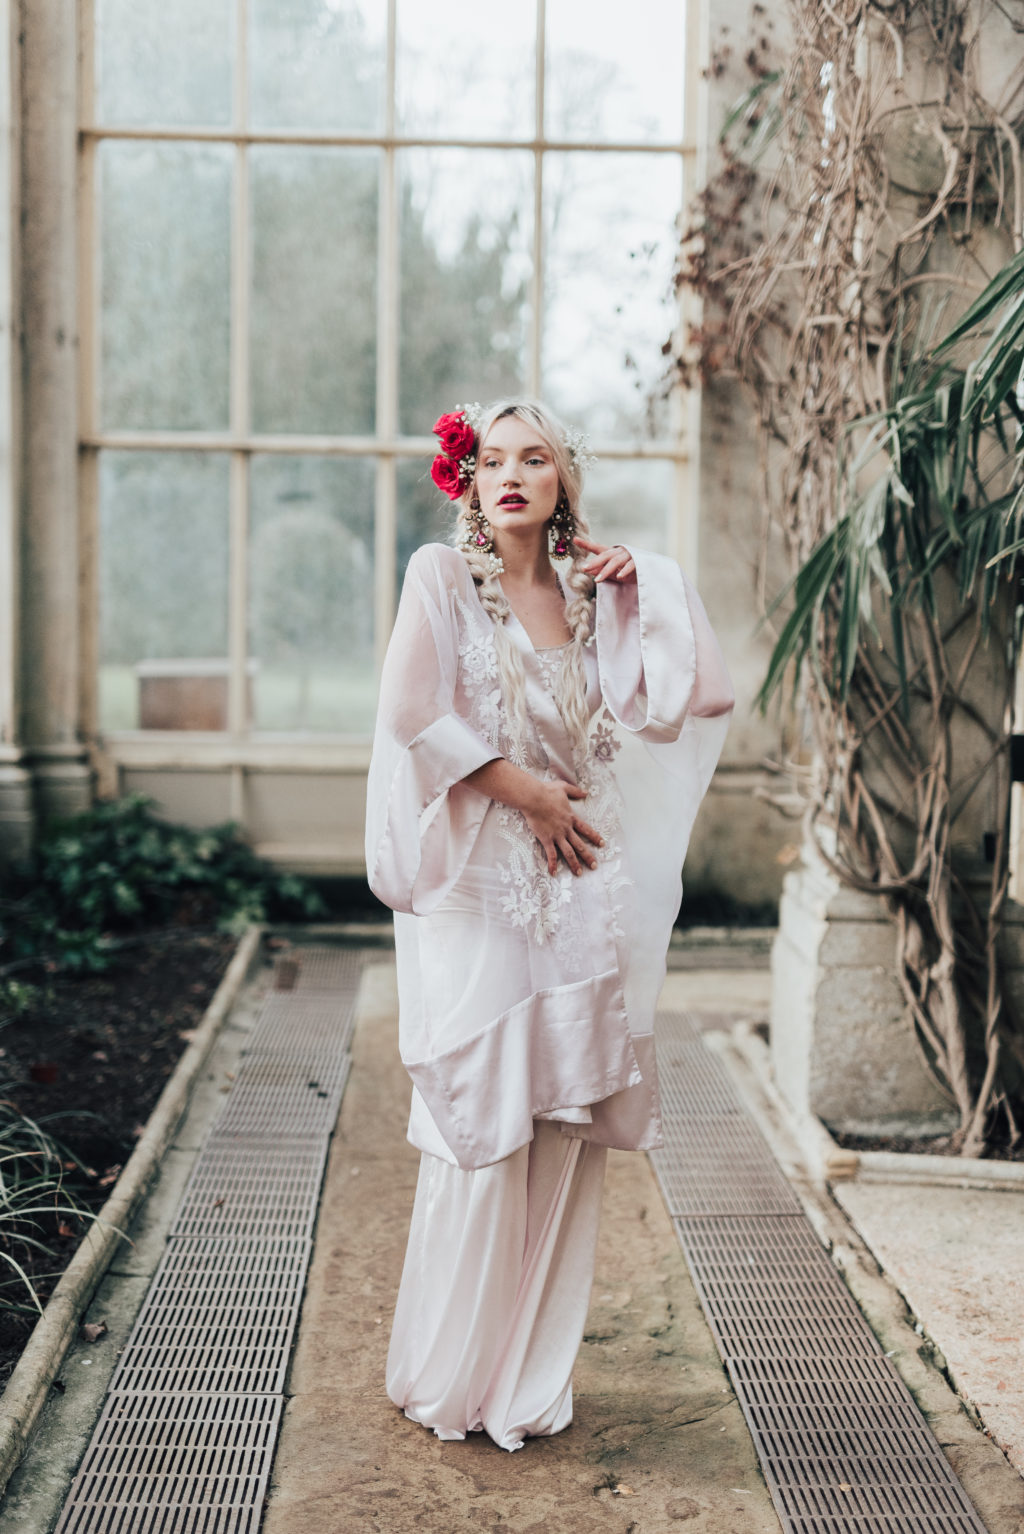 Ethical Bridalwear by Bowen Dryden: The 'Rebel Rose' Collection